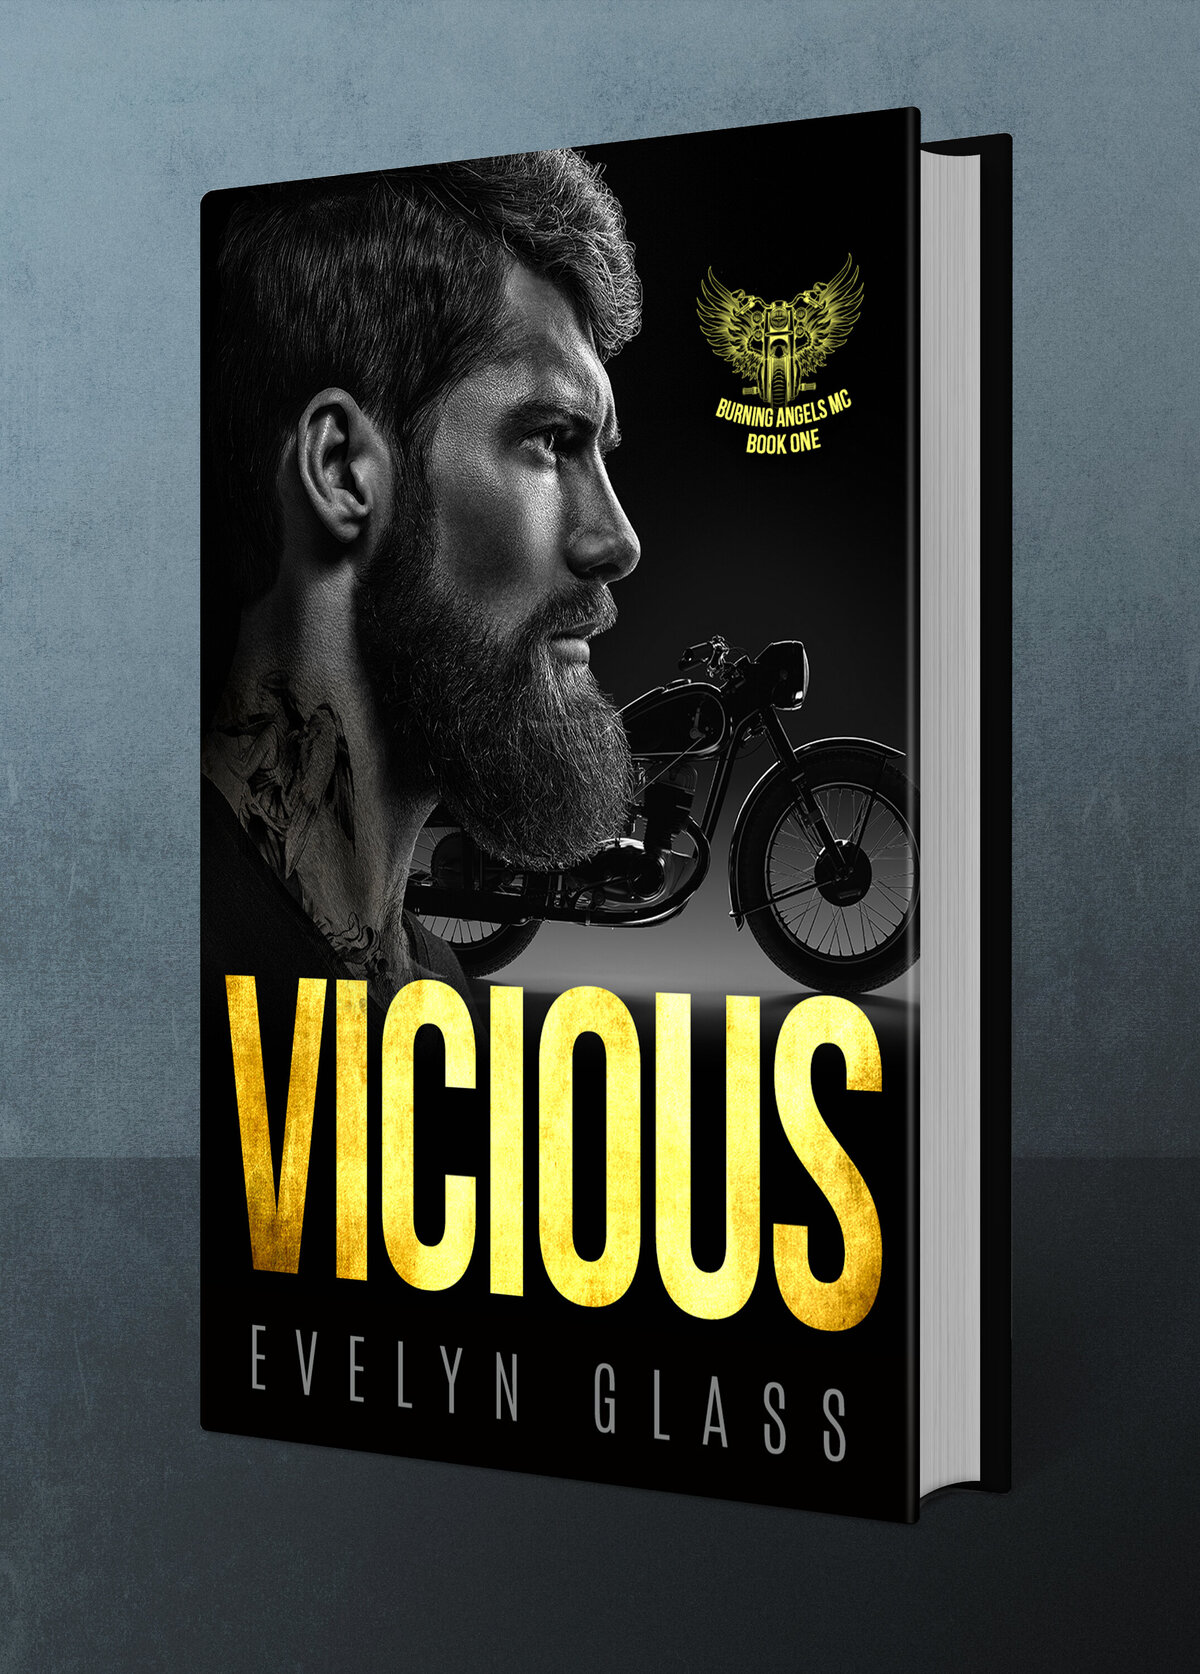 Vicious by Evelyn Glass